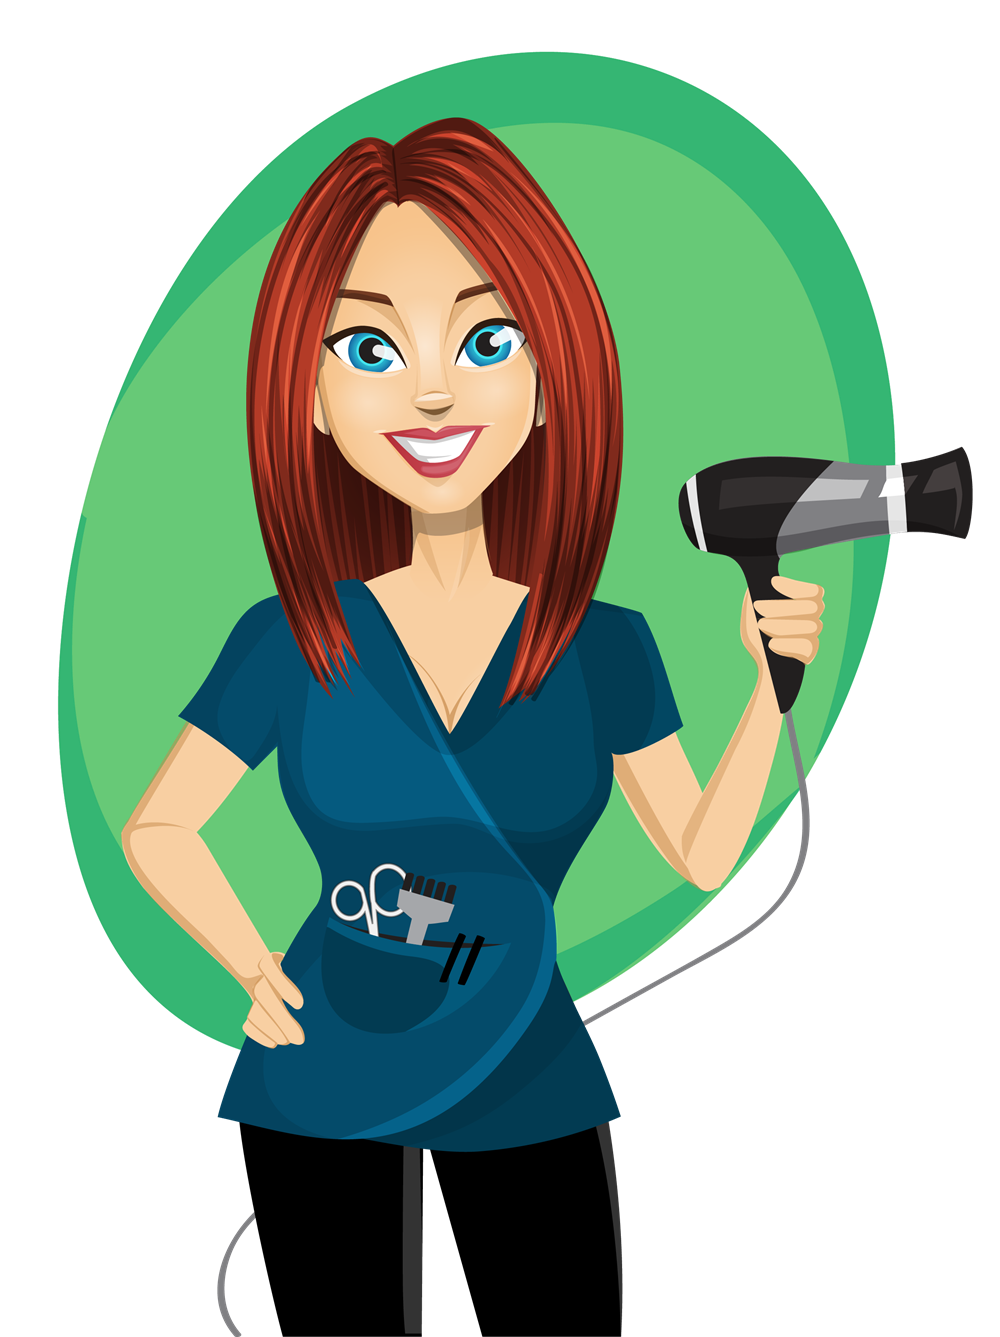 Hairstylist PNG HD - 127449